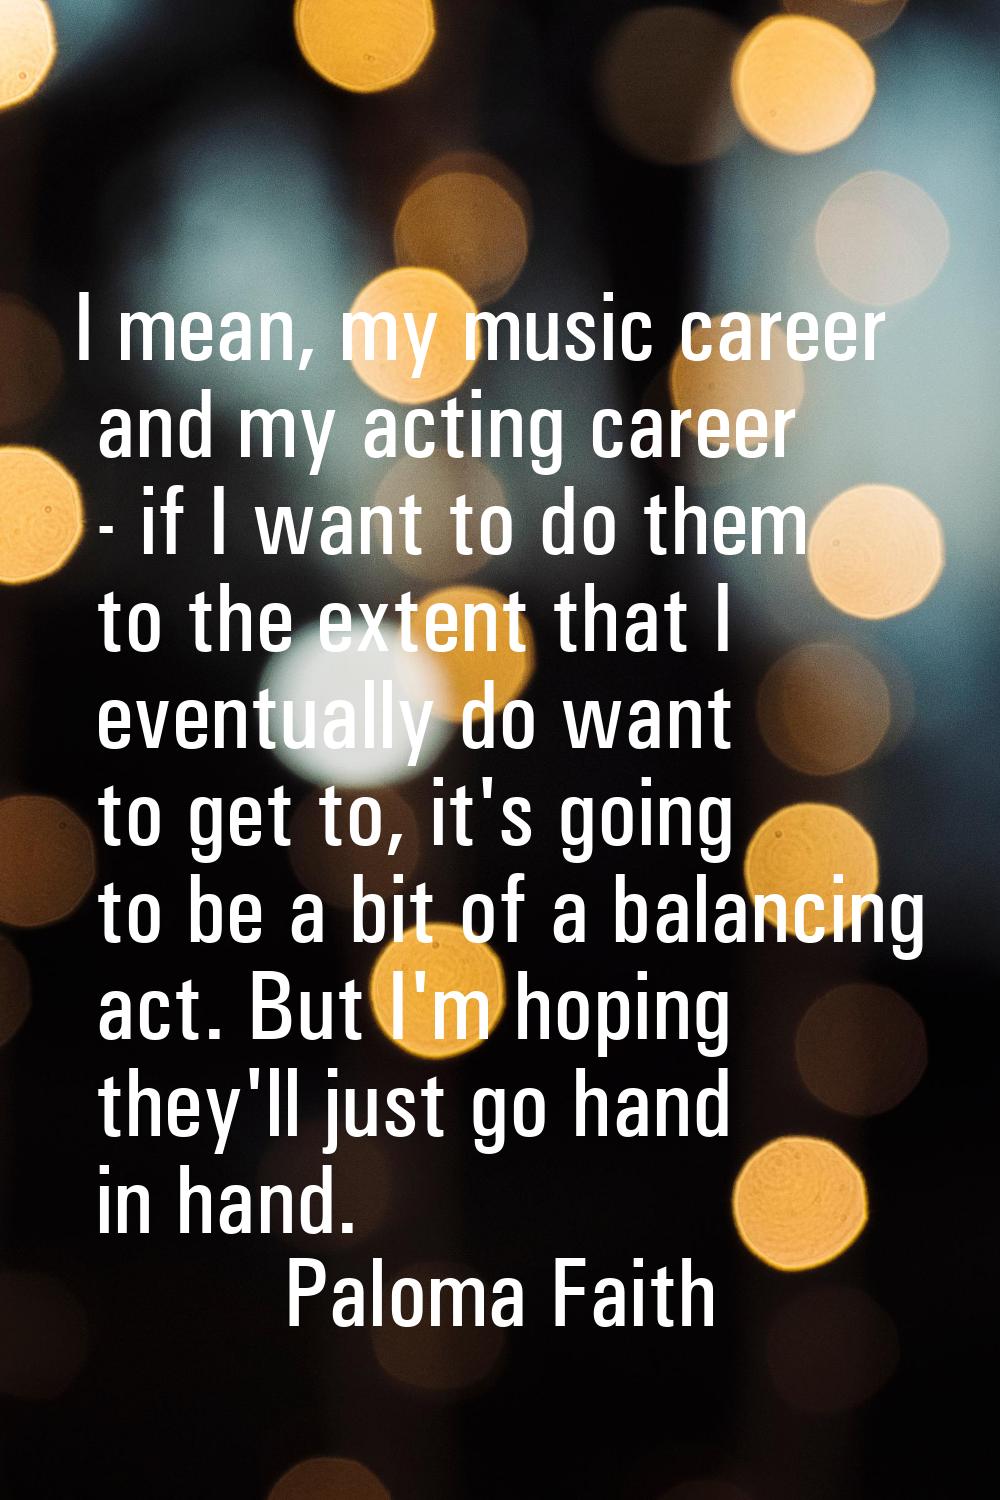 I mean, my music career and my acting career - if I want to do them to the extent that I eventually